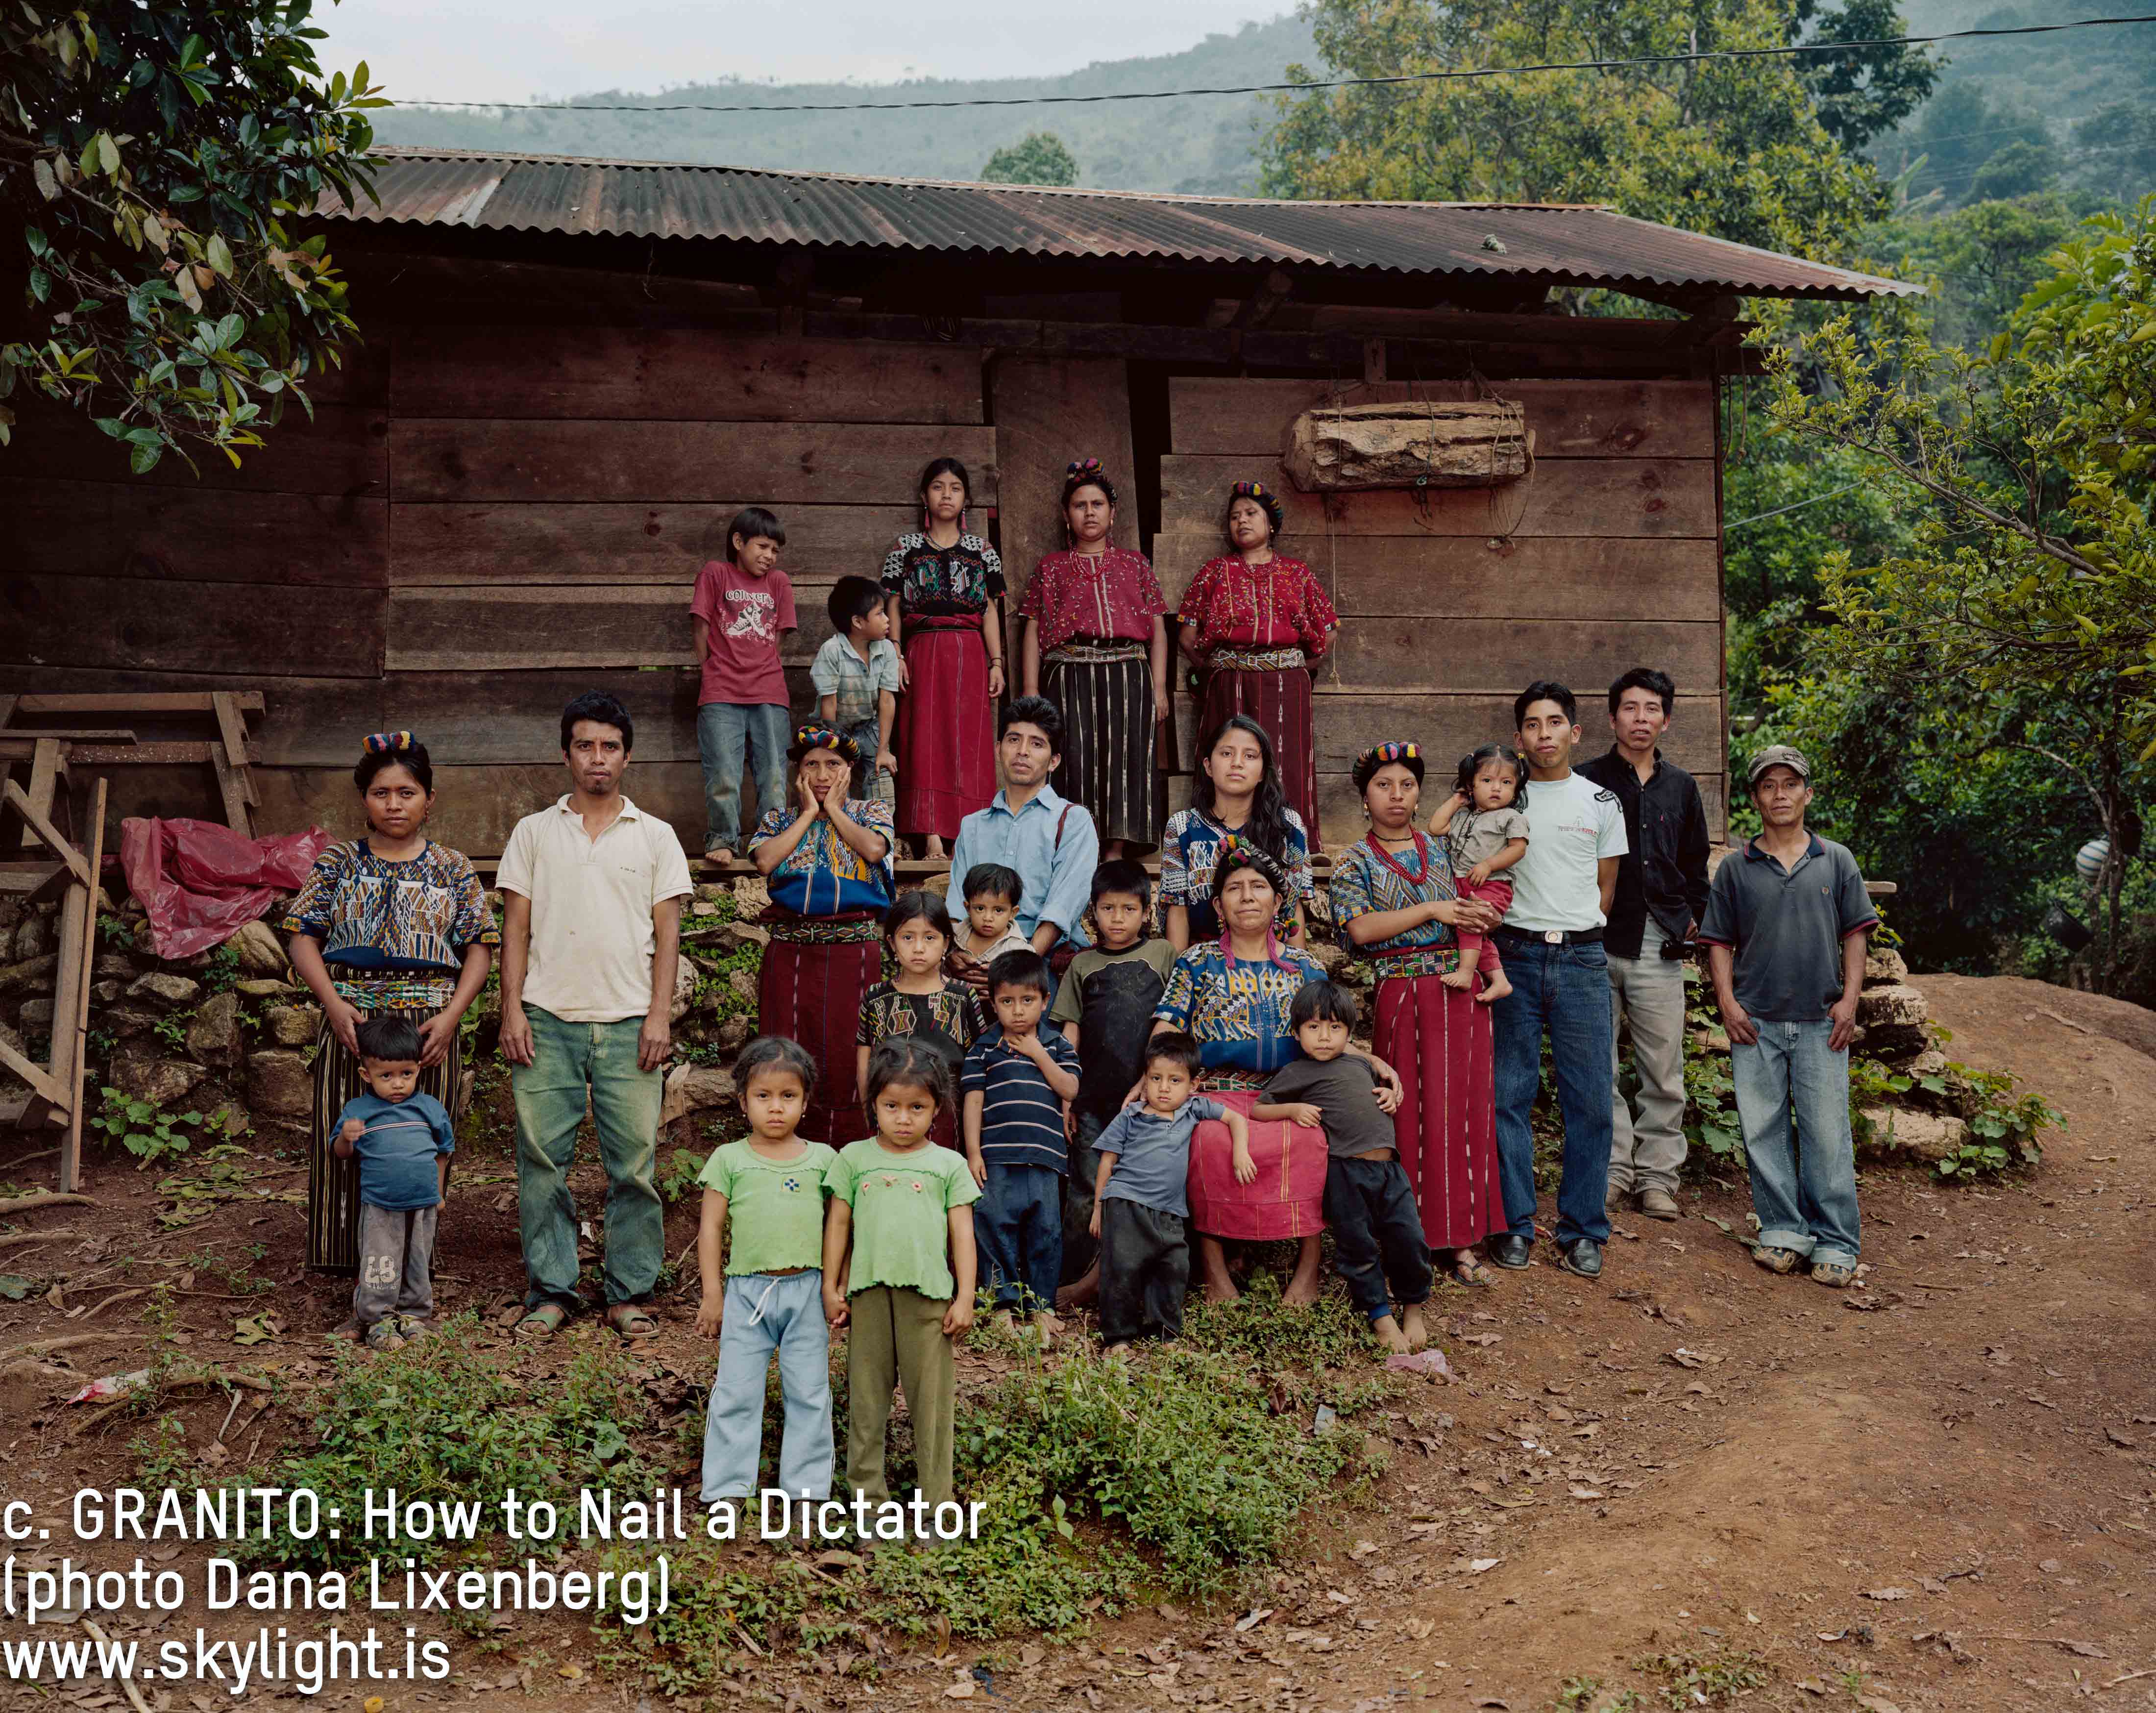 Still from Granito. Outdoor group photo of about 25 people–including, men, women, and children. The women wear patterned traditional Guatemalan indigenous clothing and headbands. All people are staring straight ahead, unsmiling. Photo credit, Dana Lixenberg, is listed on the bottom left of the image.